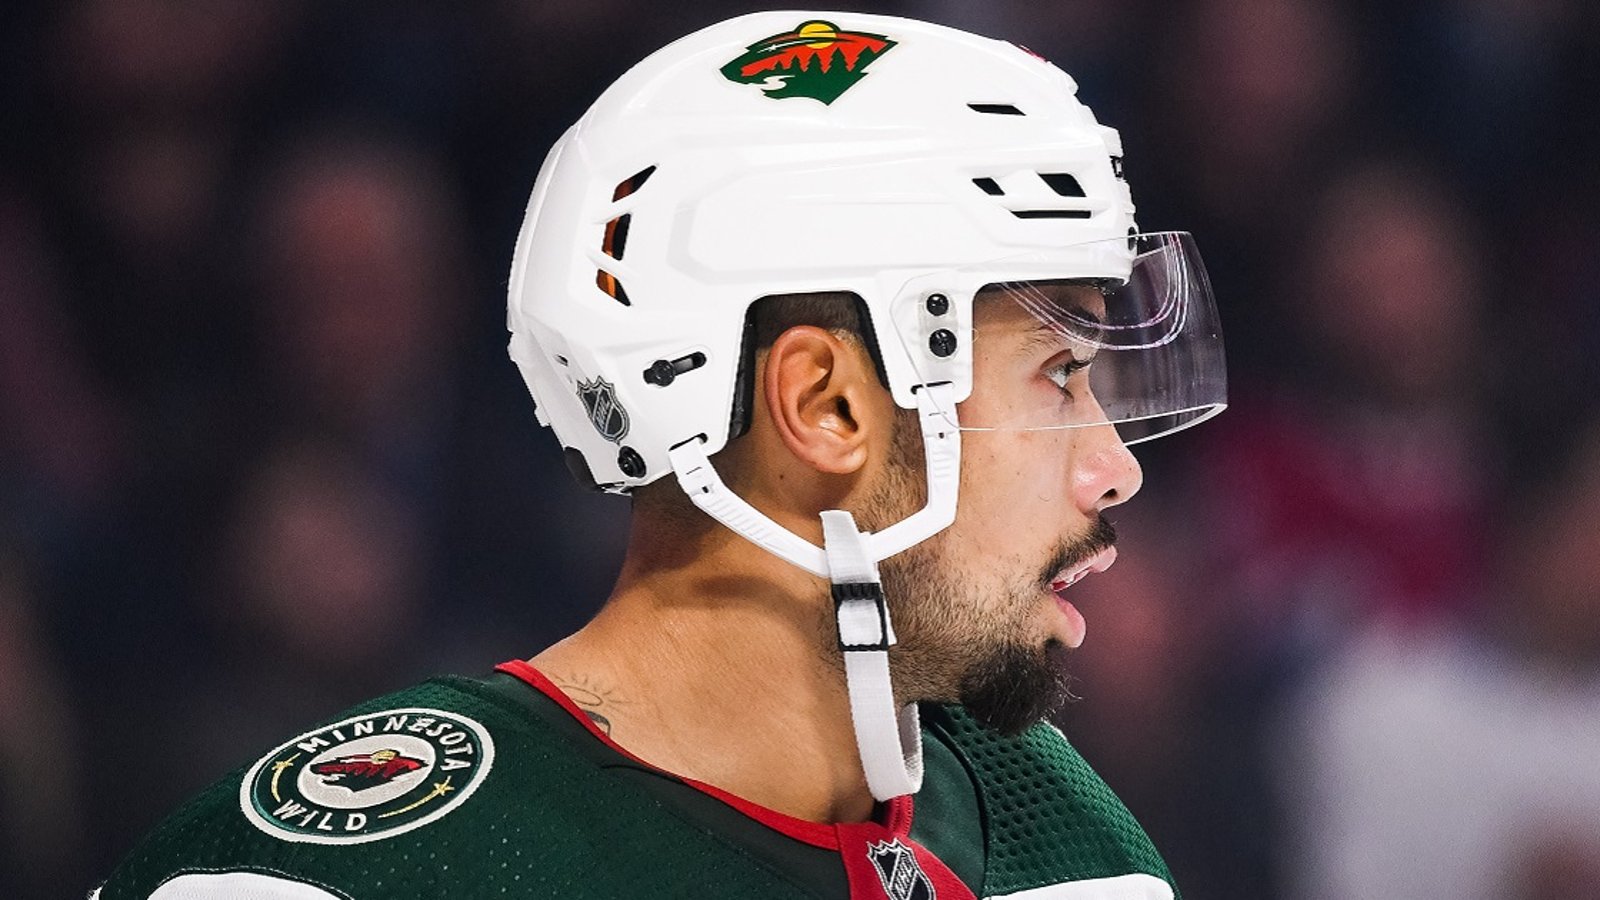 Early updates on Dumba and Johansson are not promising.